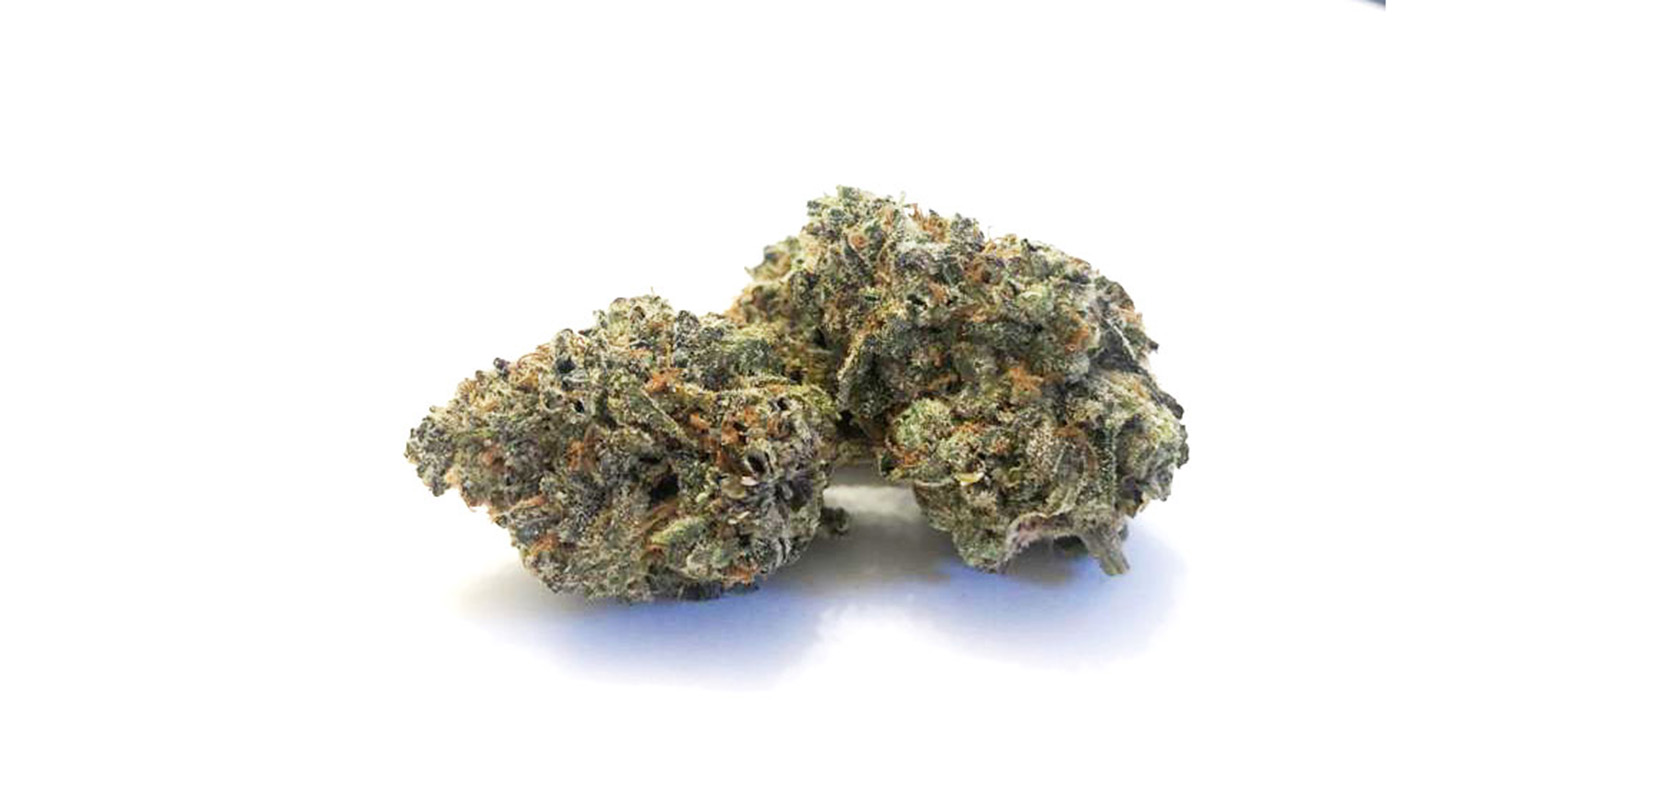 Black Nuken strain budget bud for sale at Low Price Bud weed dispensary and value buds weed store for BC cannabis and weed online Canada.